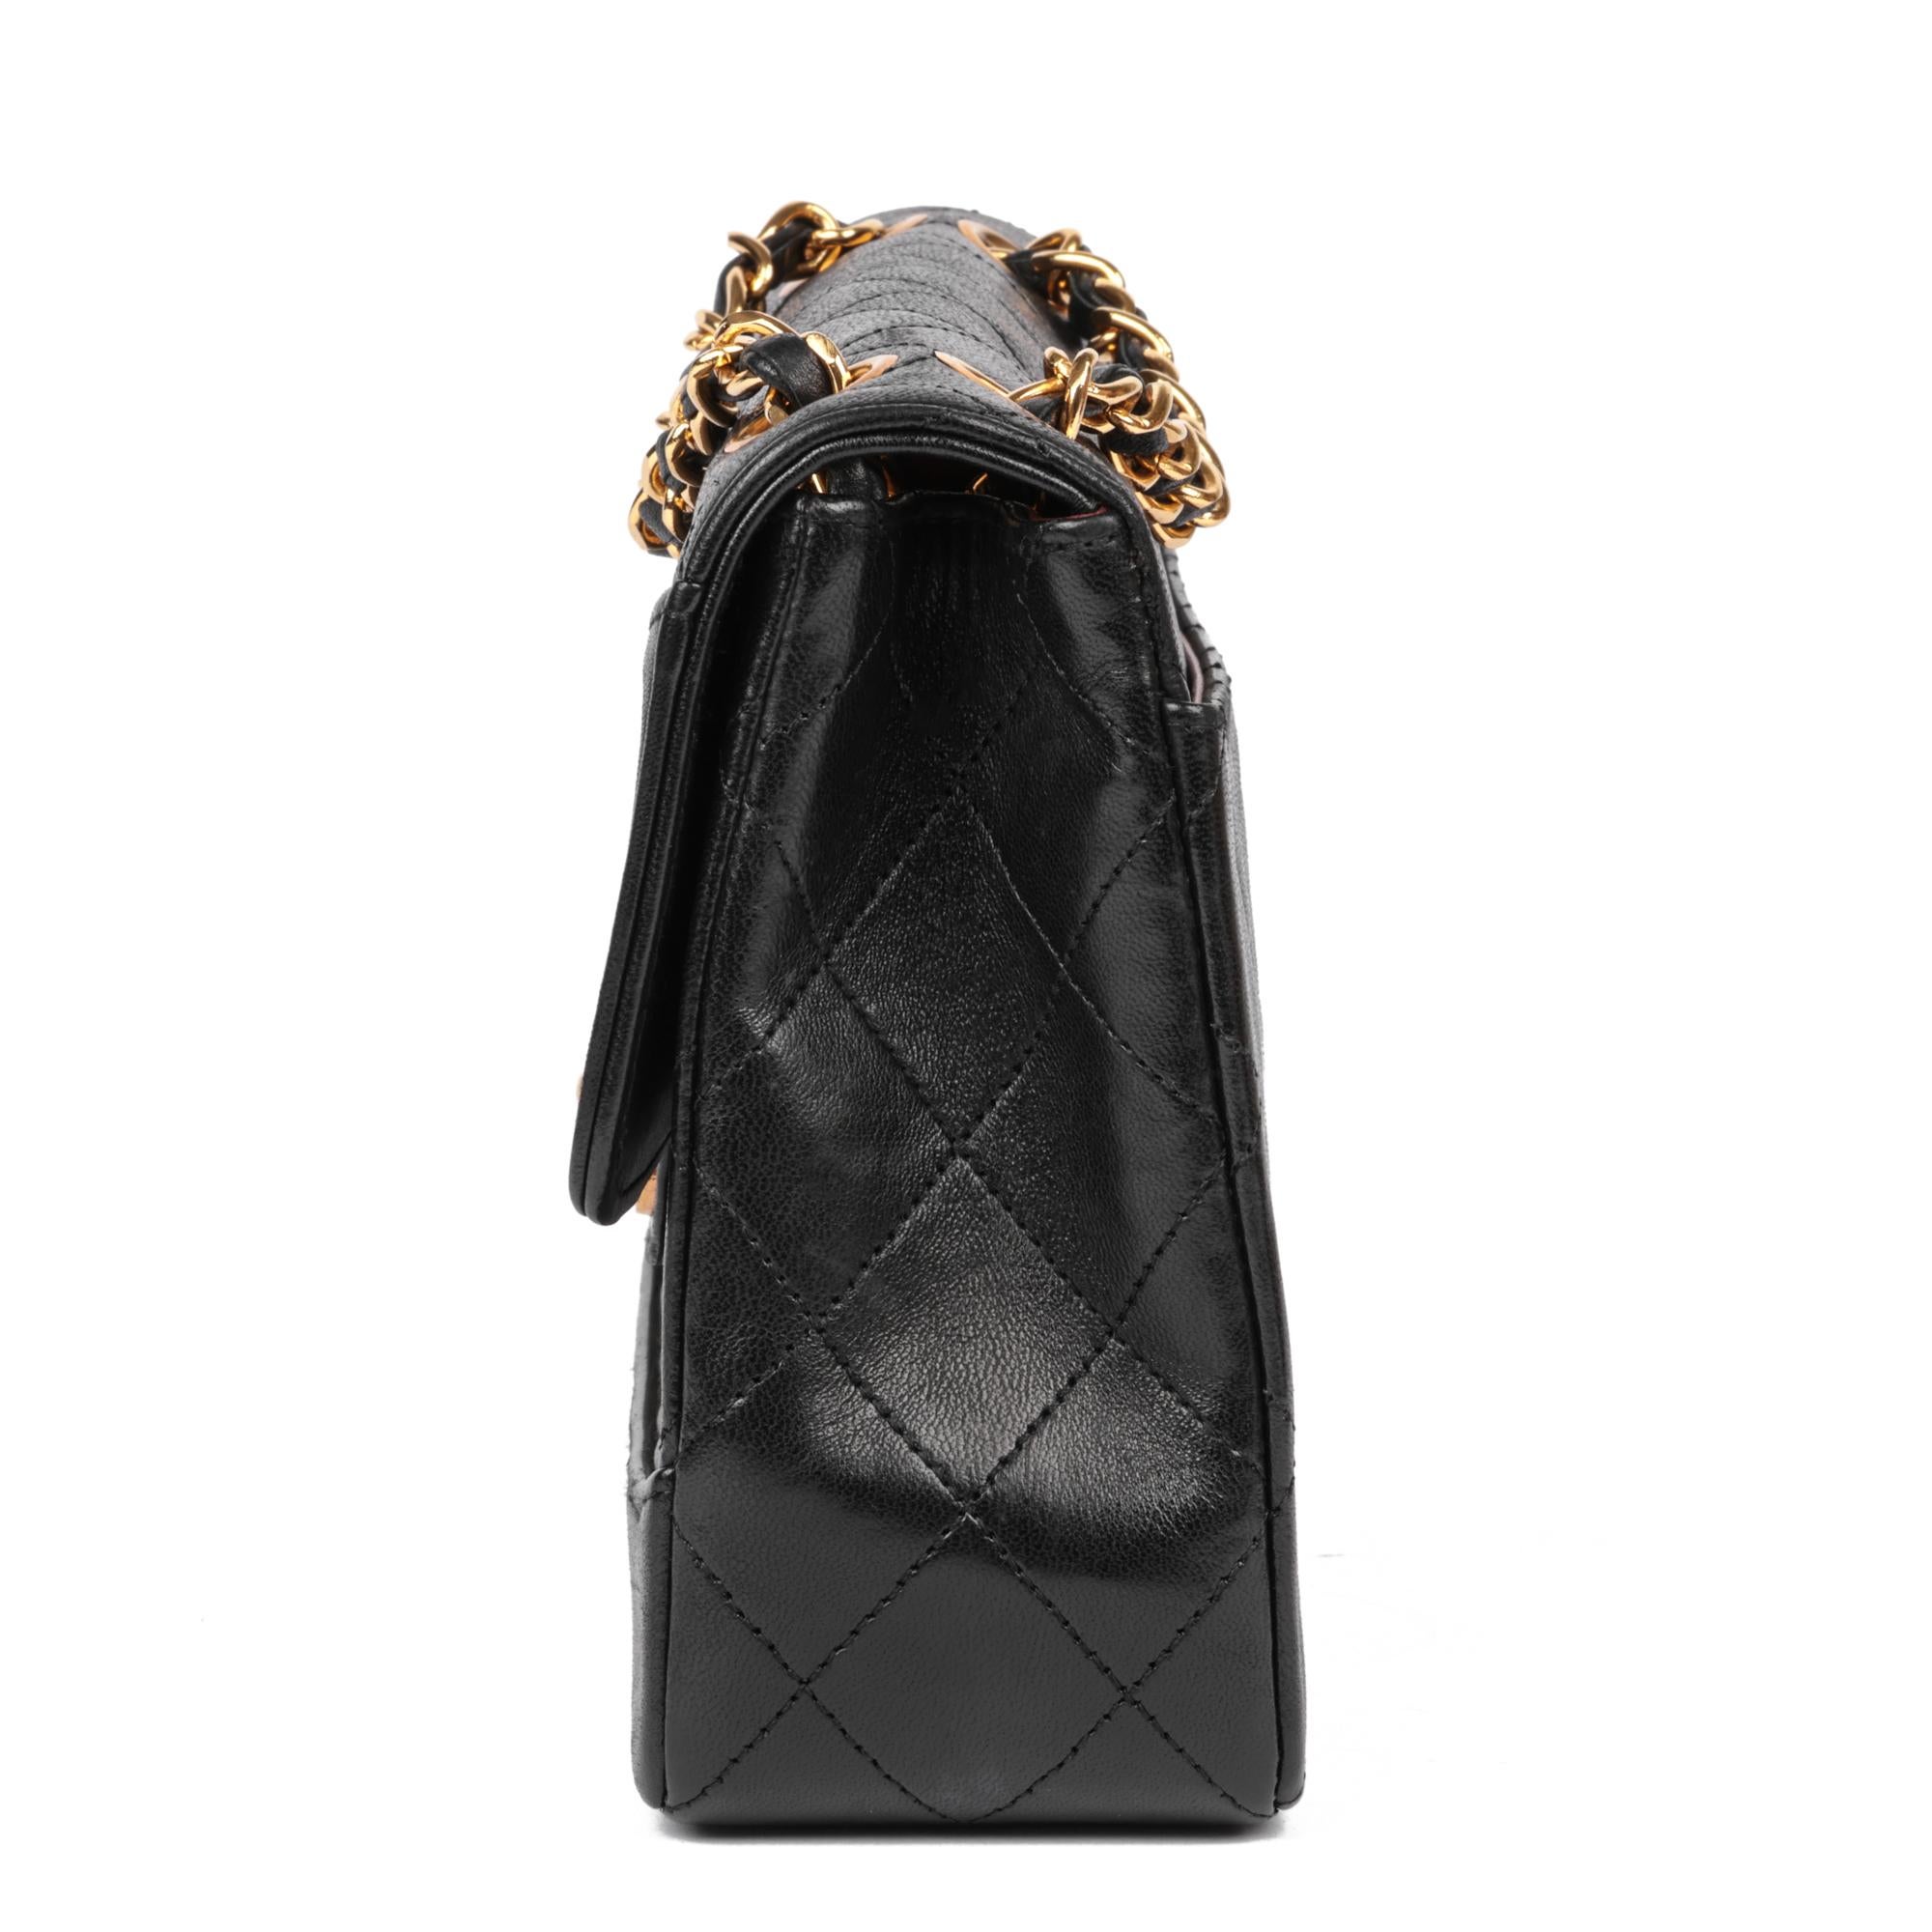 CHANEL Black Quilted Lambskin Vintage Medium Classic Single Flap Bag with Wallet In Excellent Condition For Sale In Bishop's Stortford, Hertfordshire